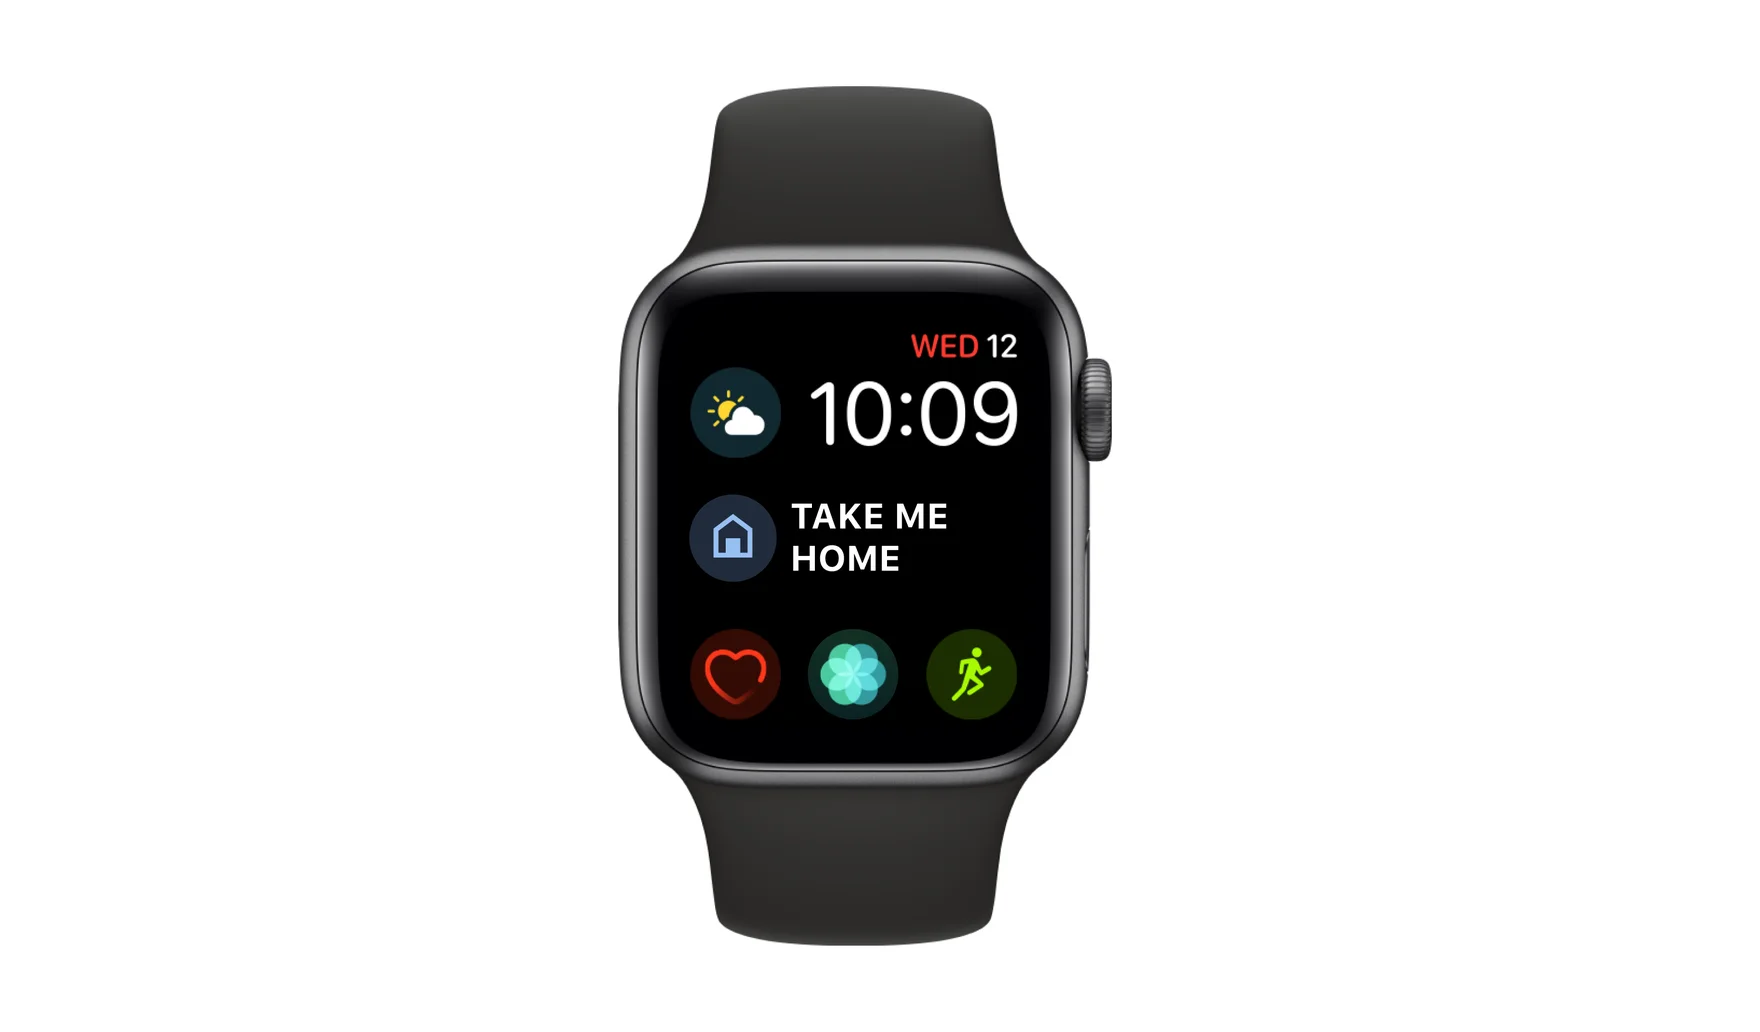 Black Apple Watch featuring new “Take me home” complication